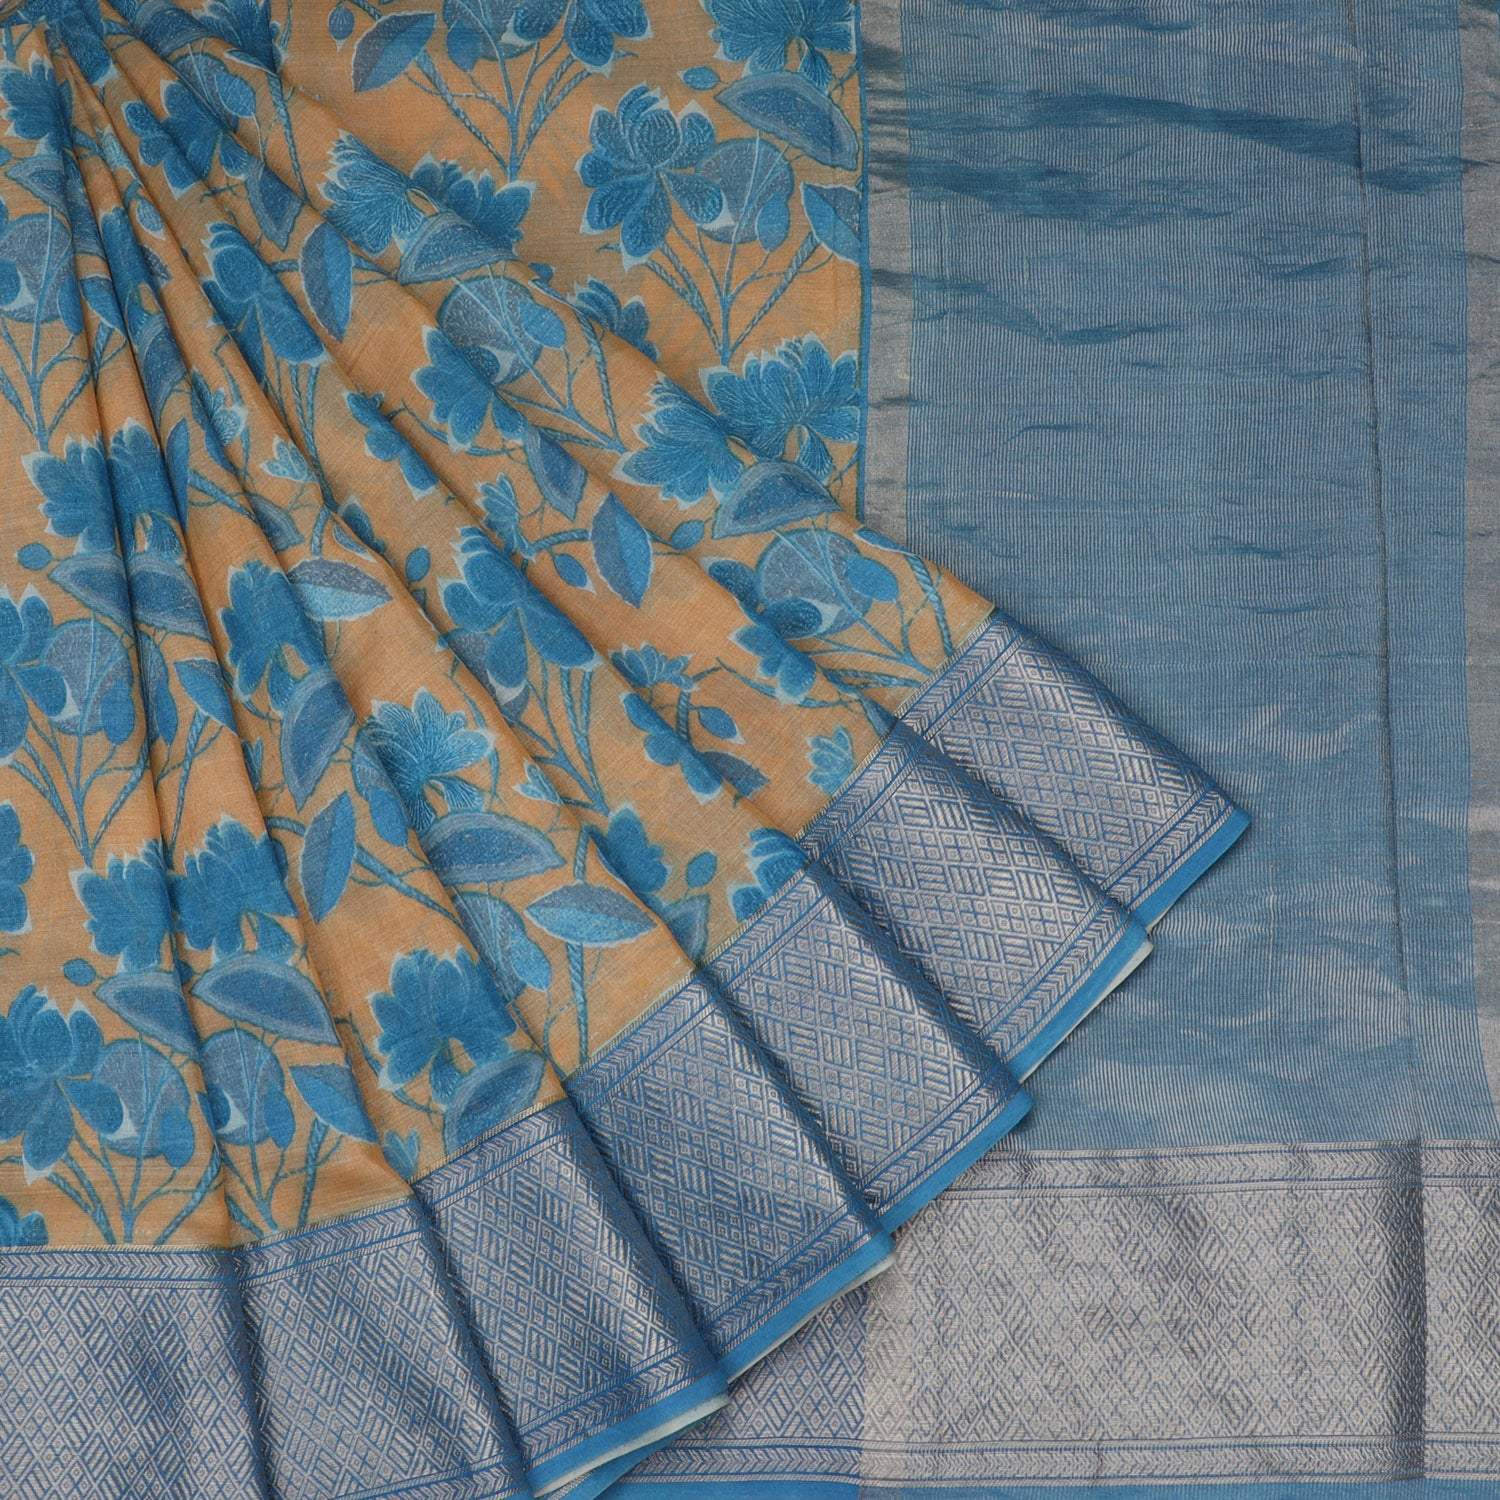 Mustard Yellow Cotton Saree With Floral Printed Motifs - Singhania's